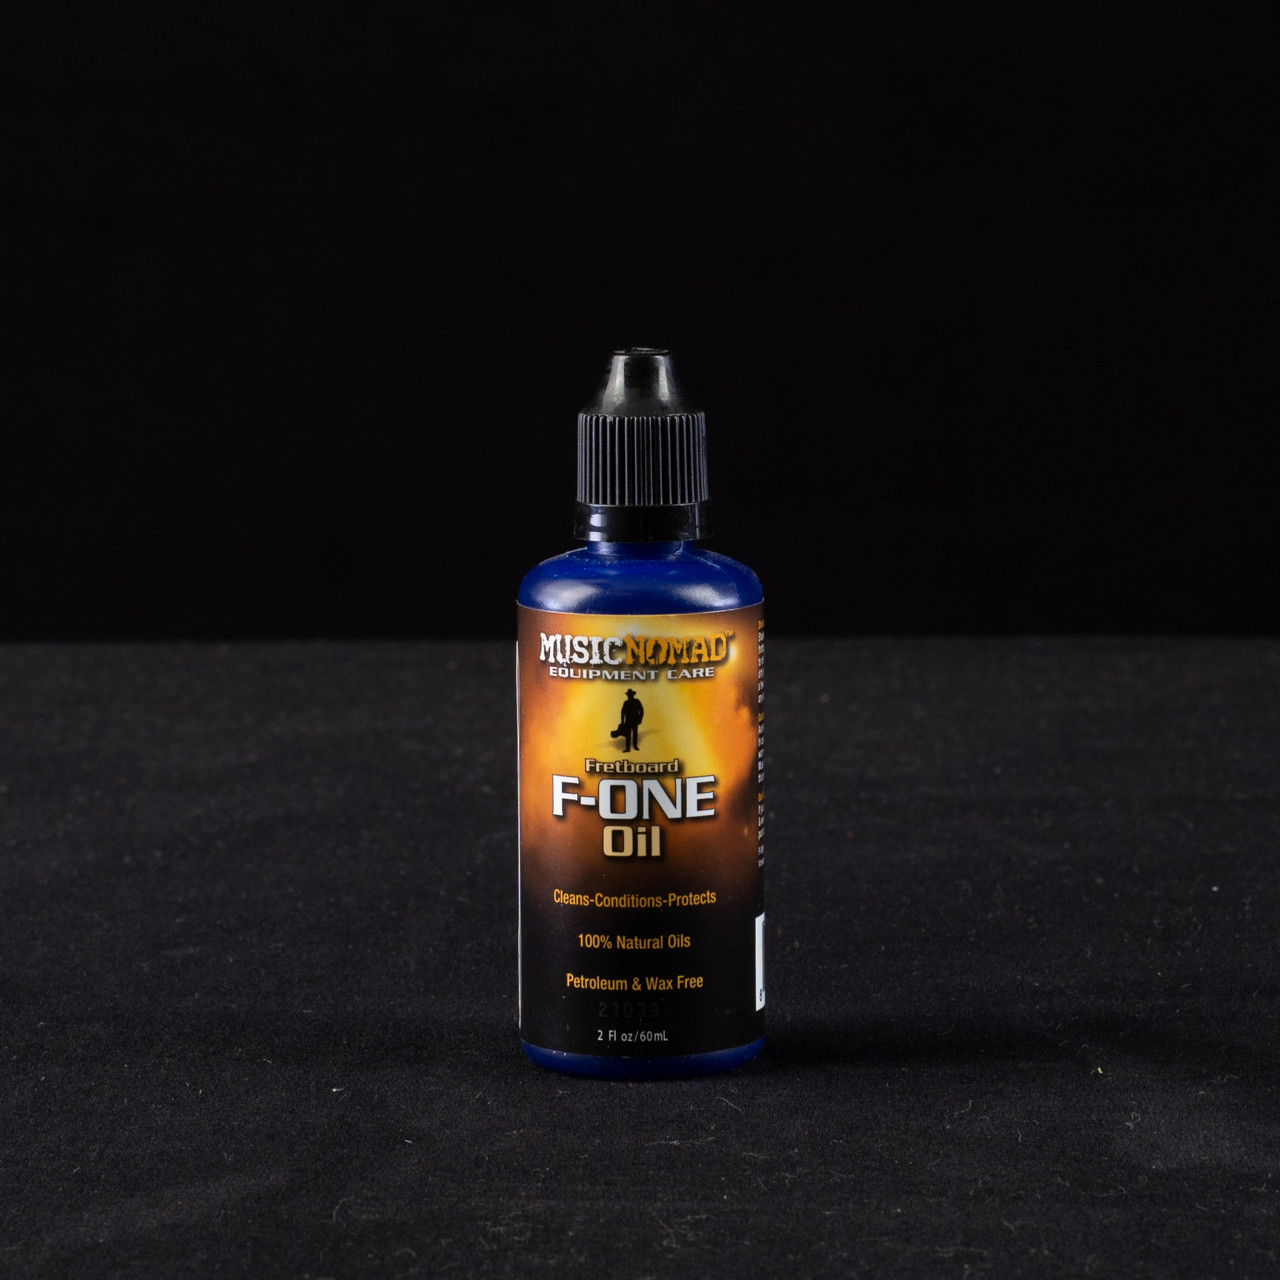 Music Nomad F-One Fretboard Oil Cleaner & Conditioner